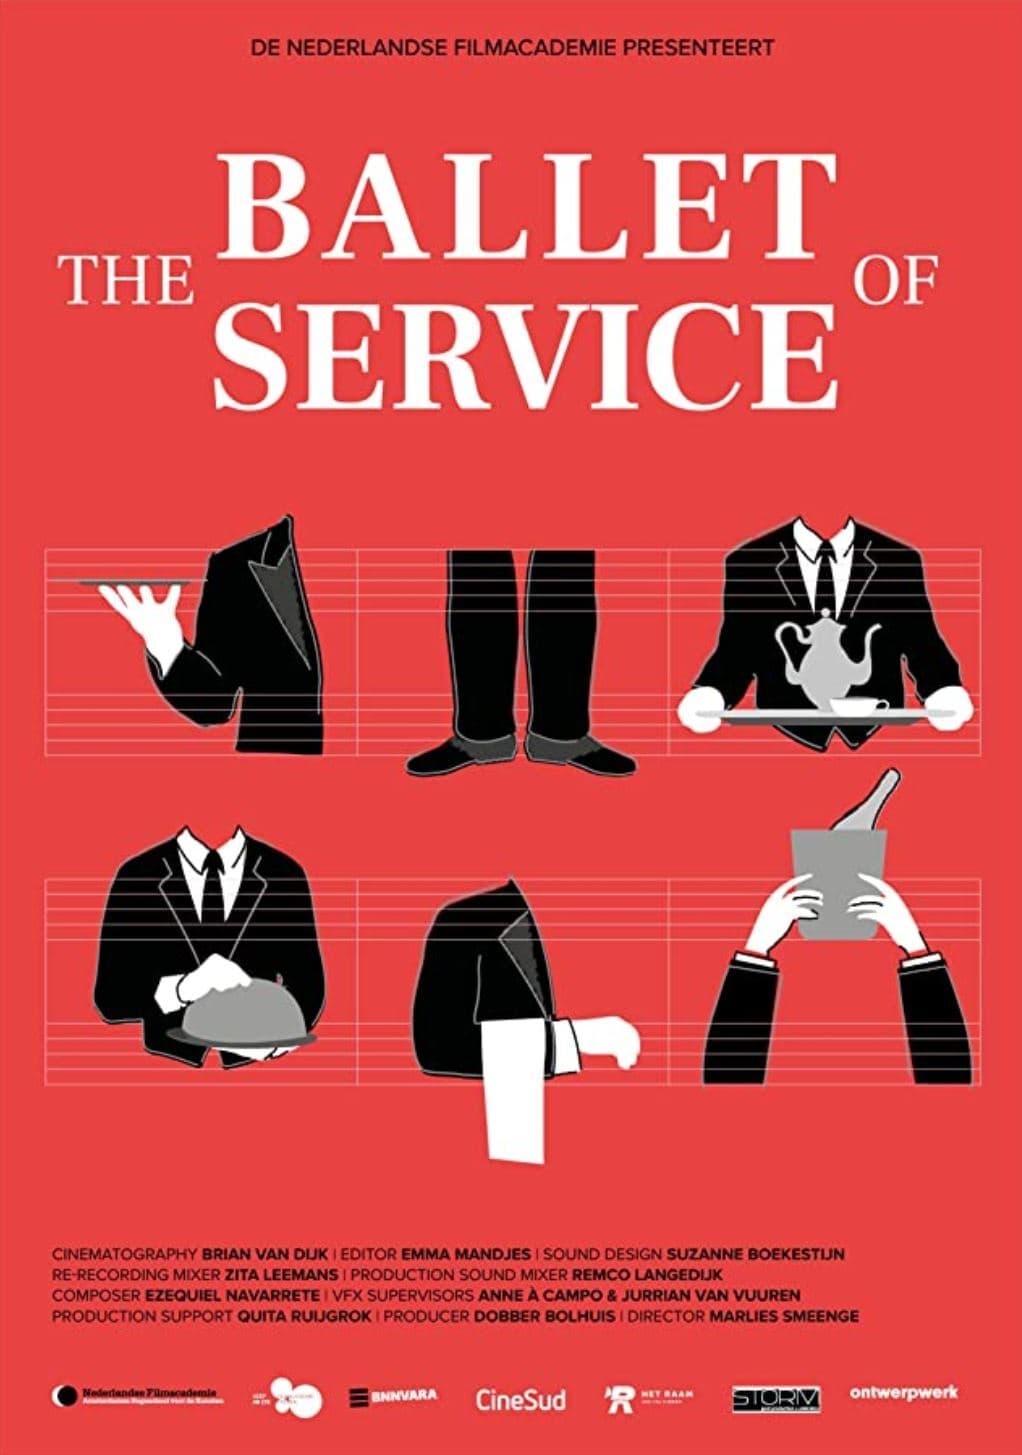 The Ballet of Service